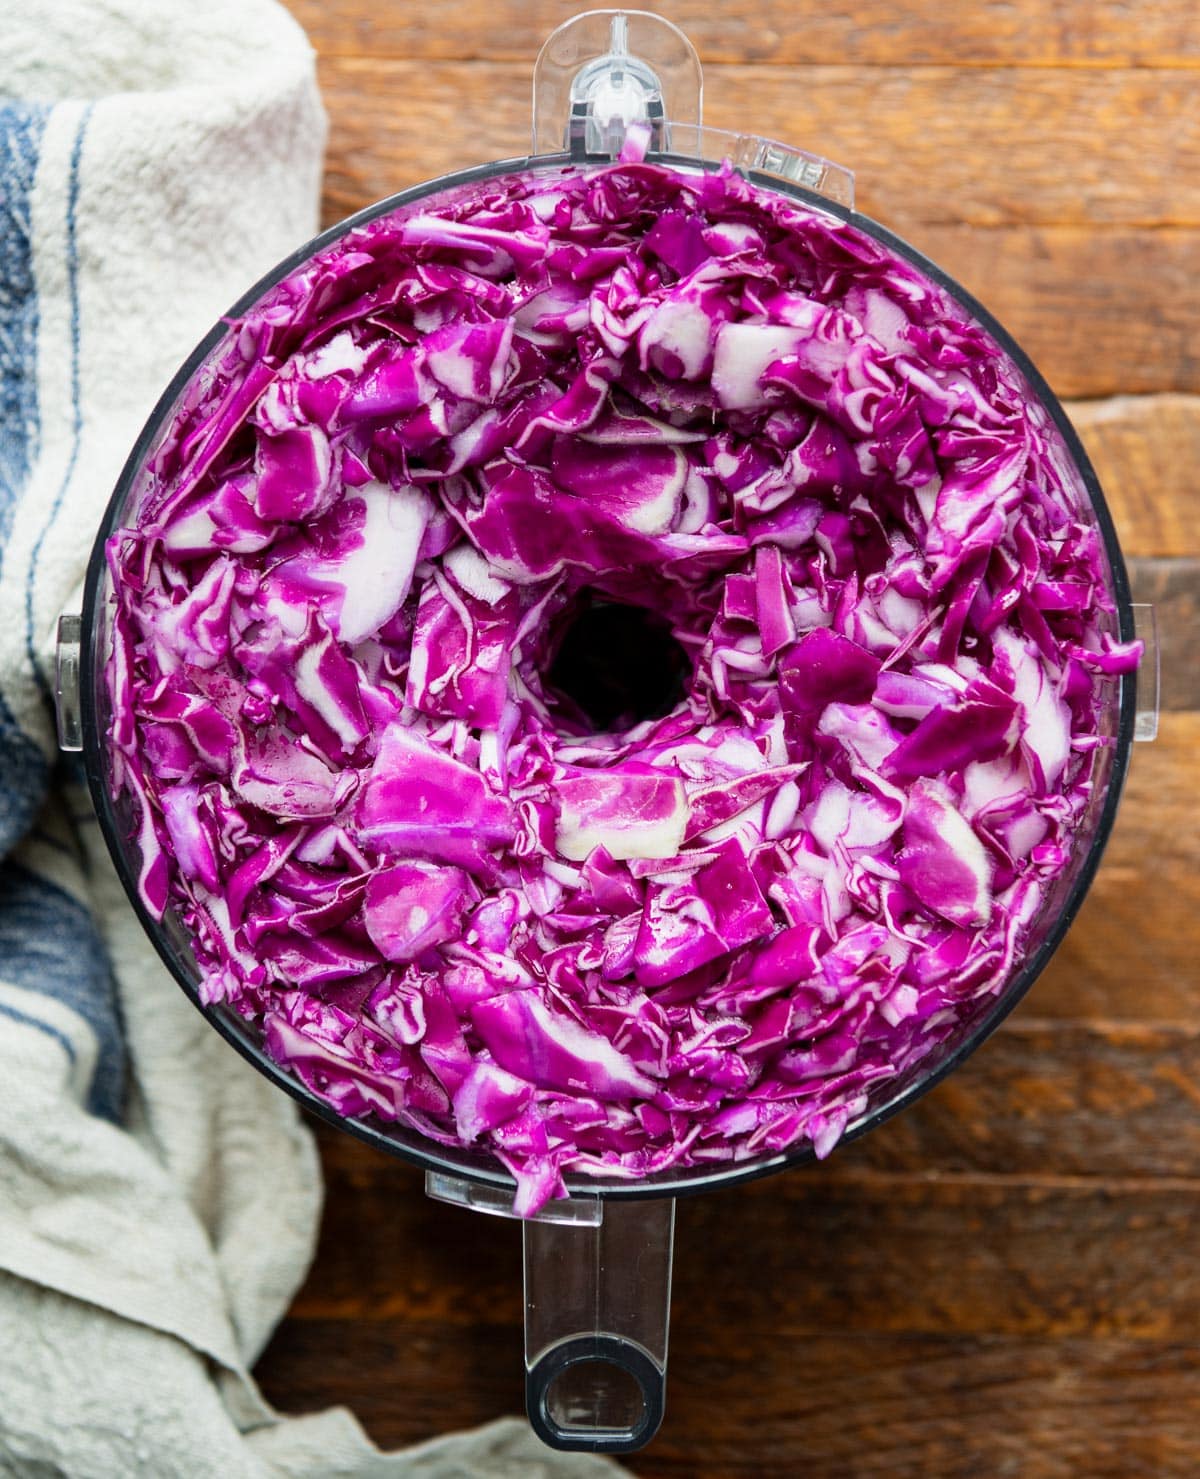 Sliced red cabbage in a food processor.